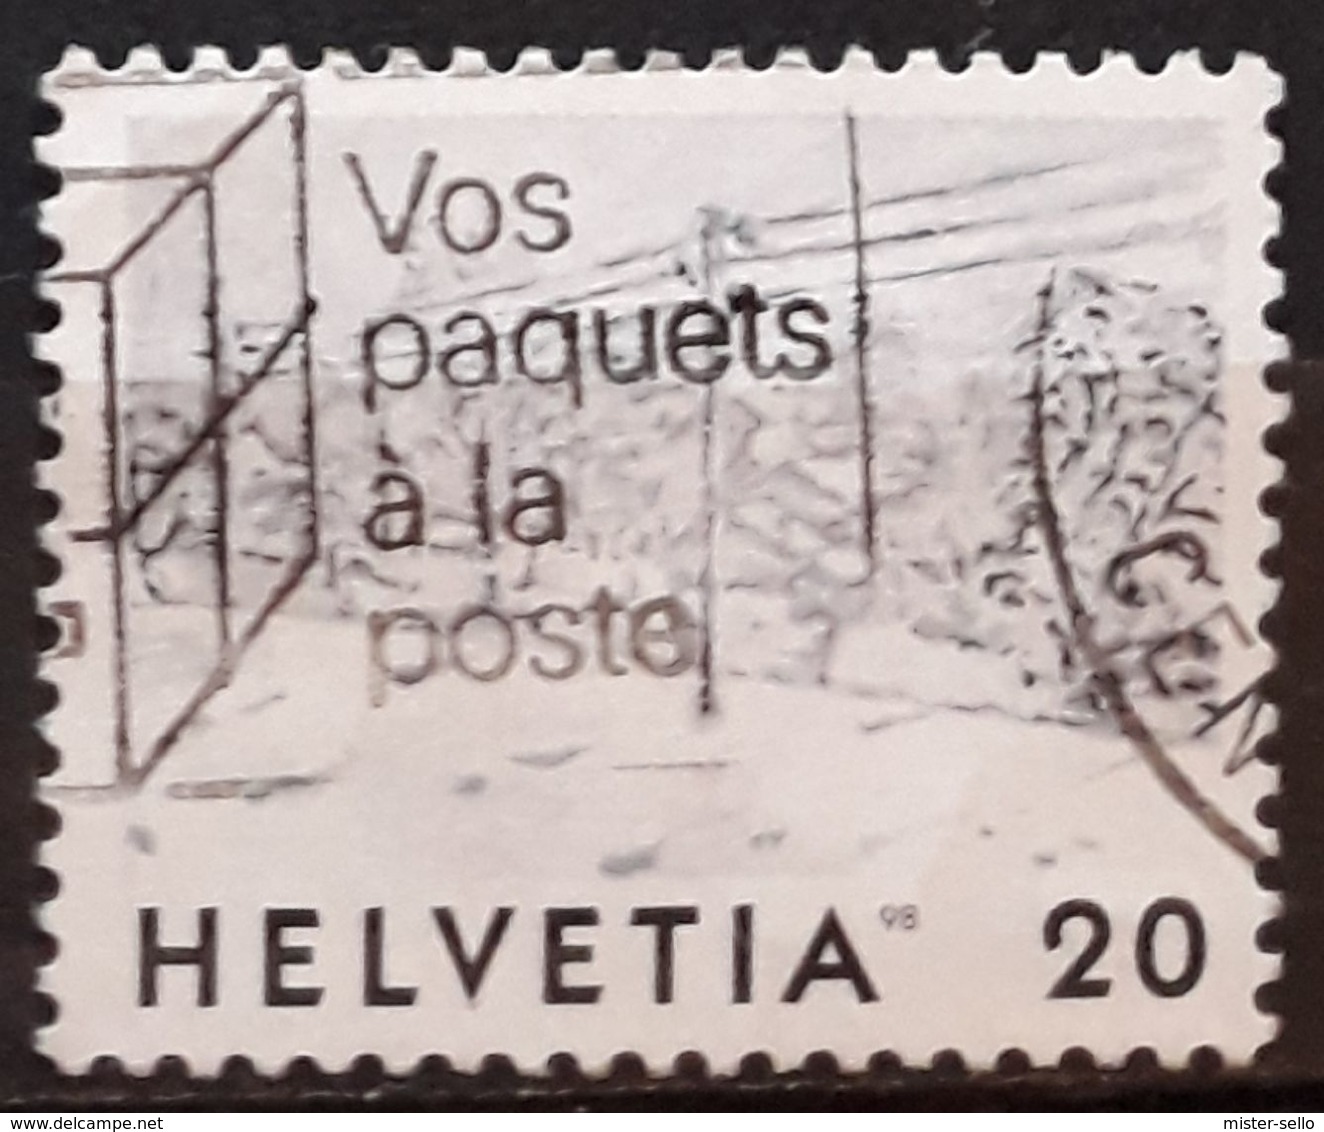 SUIZA 1998 Definitive Issues. USADO - USED. - Usados